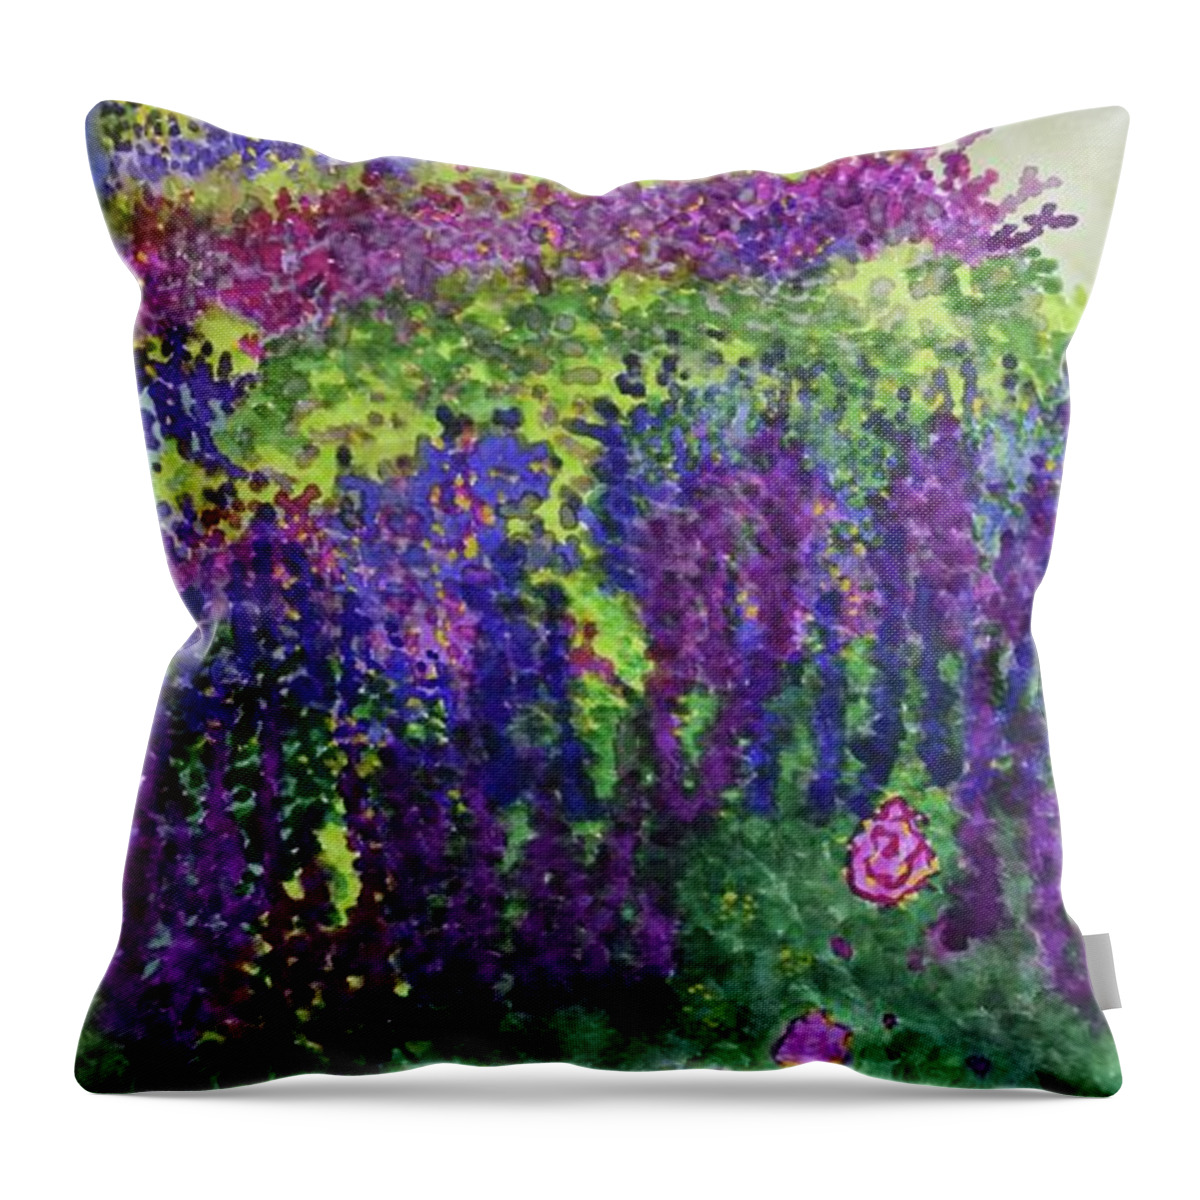  Throw Pillow featuring the painting Another Garden Dream by Barrie Stark